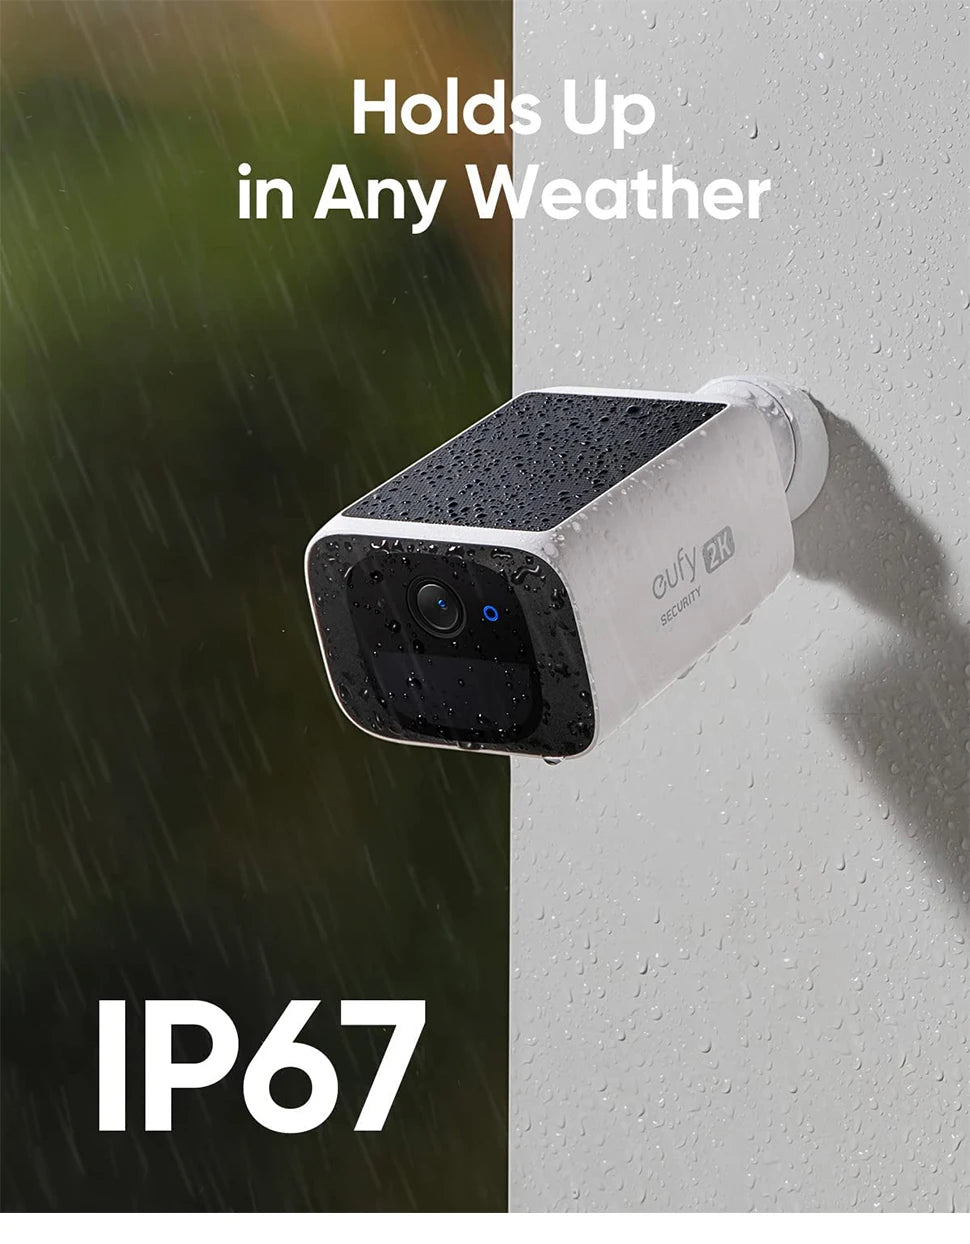 Eufy S220 SoloCam - Solar Security Camera, Rugged design withstands weather conditions up to IP67 for reliable outdoor surveillance.